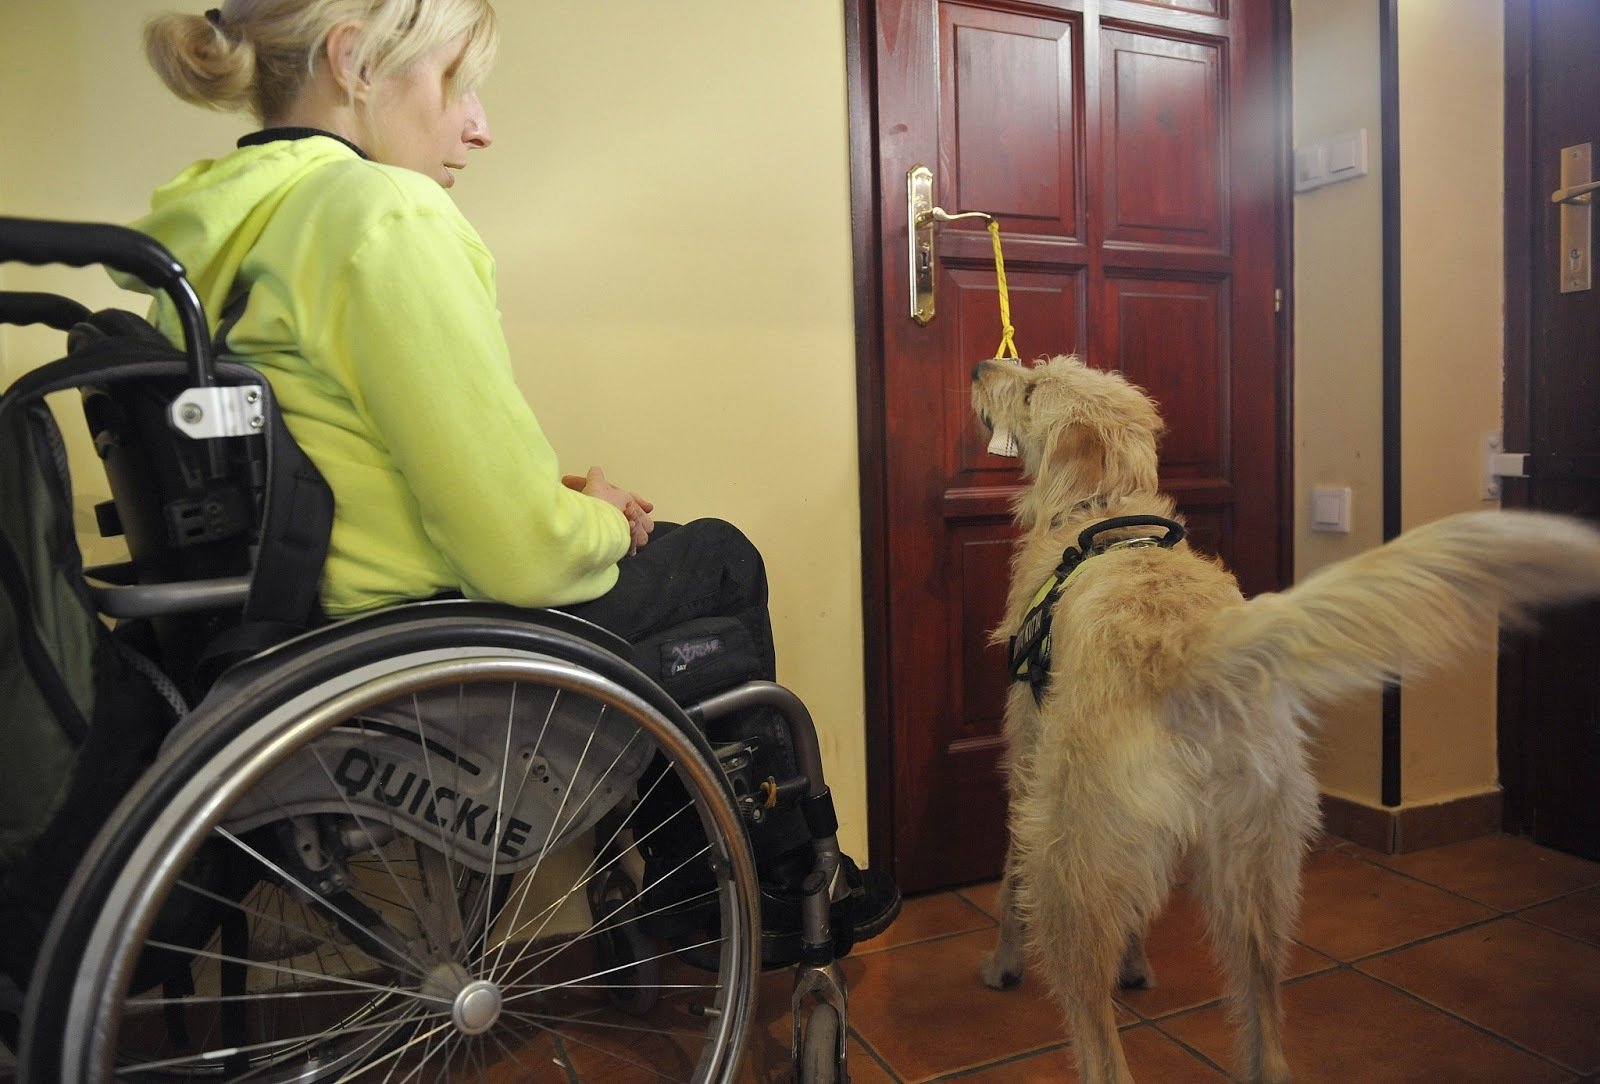 A service dog's company provides more freedom for a disabled person